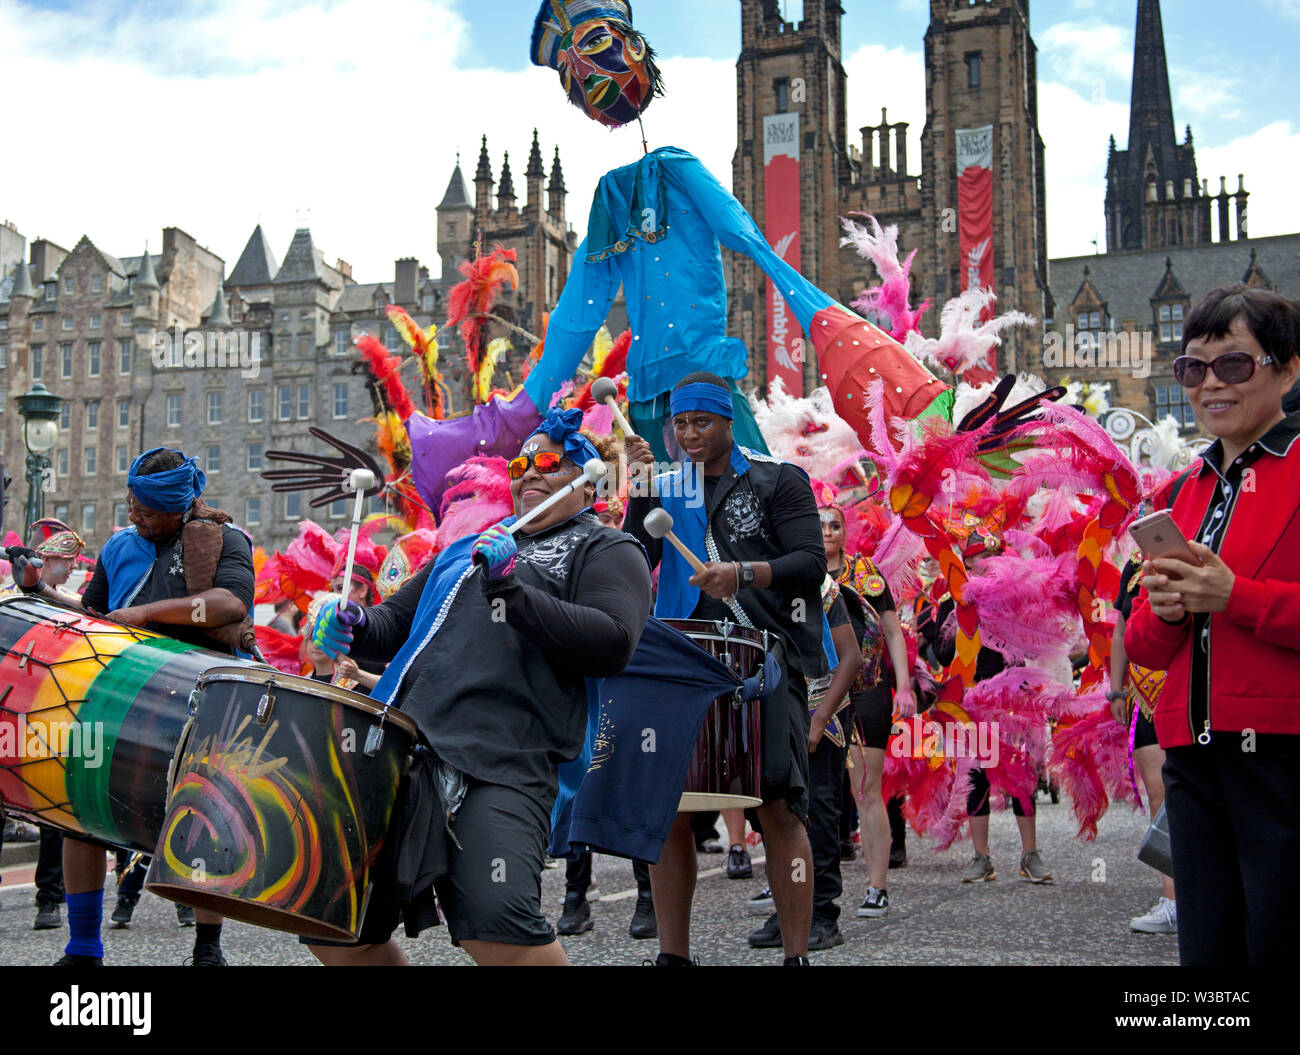 Edinburgh, Scotland, UK.14th July 2019. Edinburgh Festival Carnival 2019. More than 800 performers took part in the colourful parade from the top of The Mound down through Princes Street and into Princes Street Gardens West to continue the party atmosphere with world class music and dance to entertain the crowds who attended and lined the streets. Stock Photo